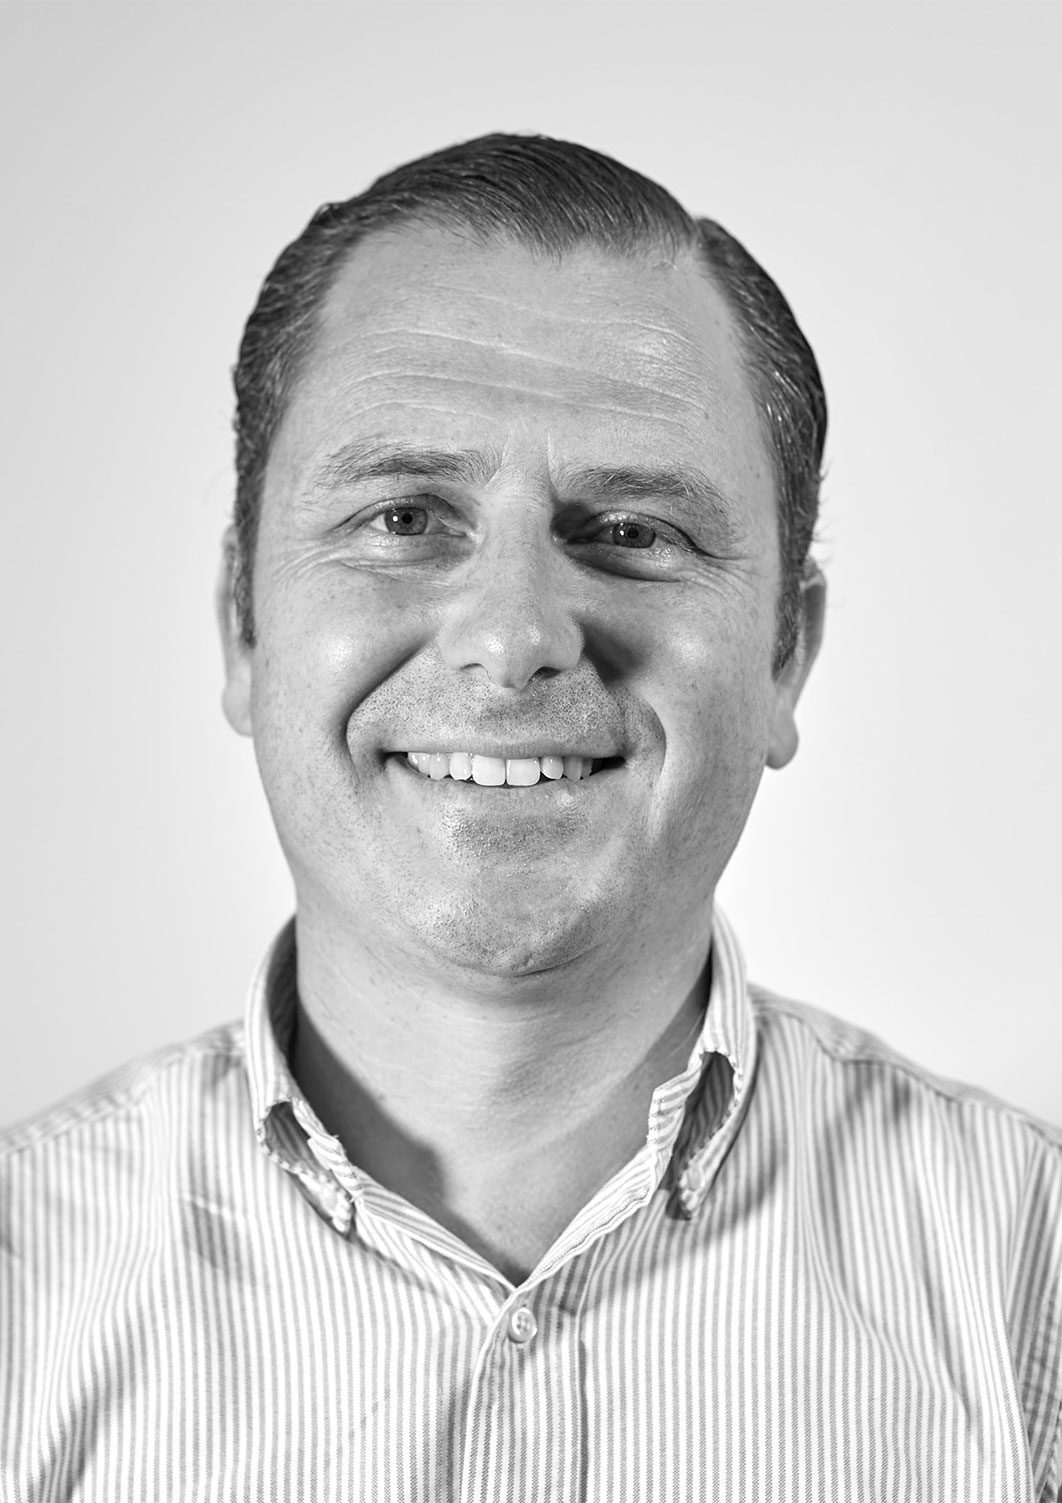 Black and White Headshot of AAG CEO Daniel Hawker